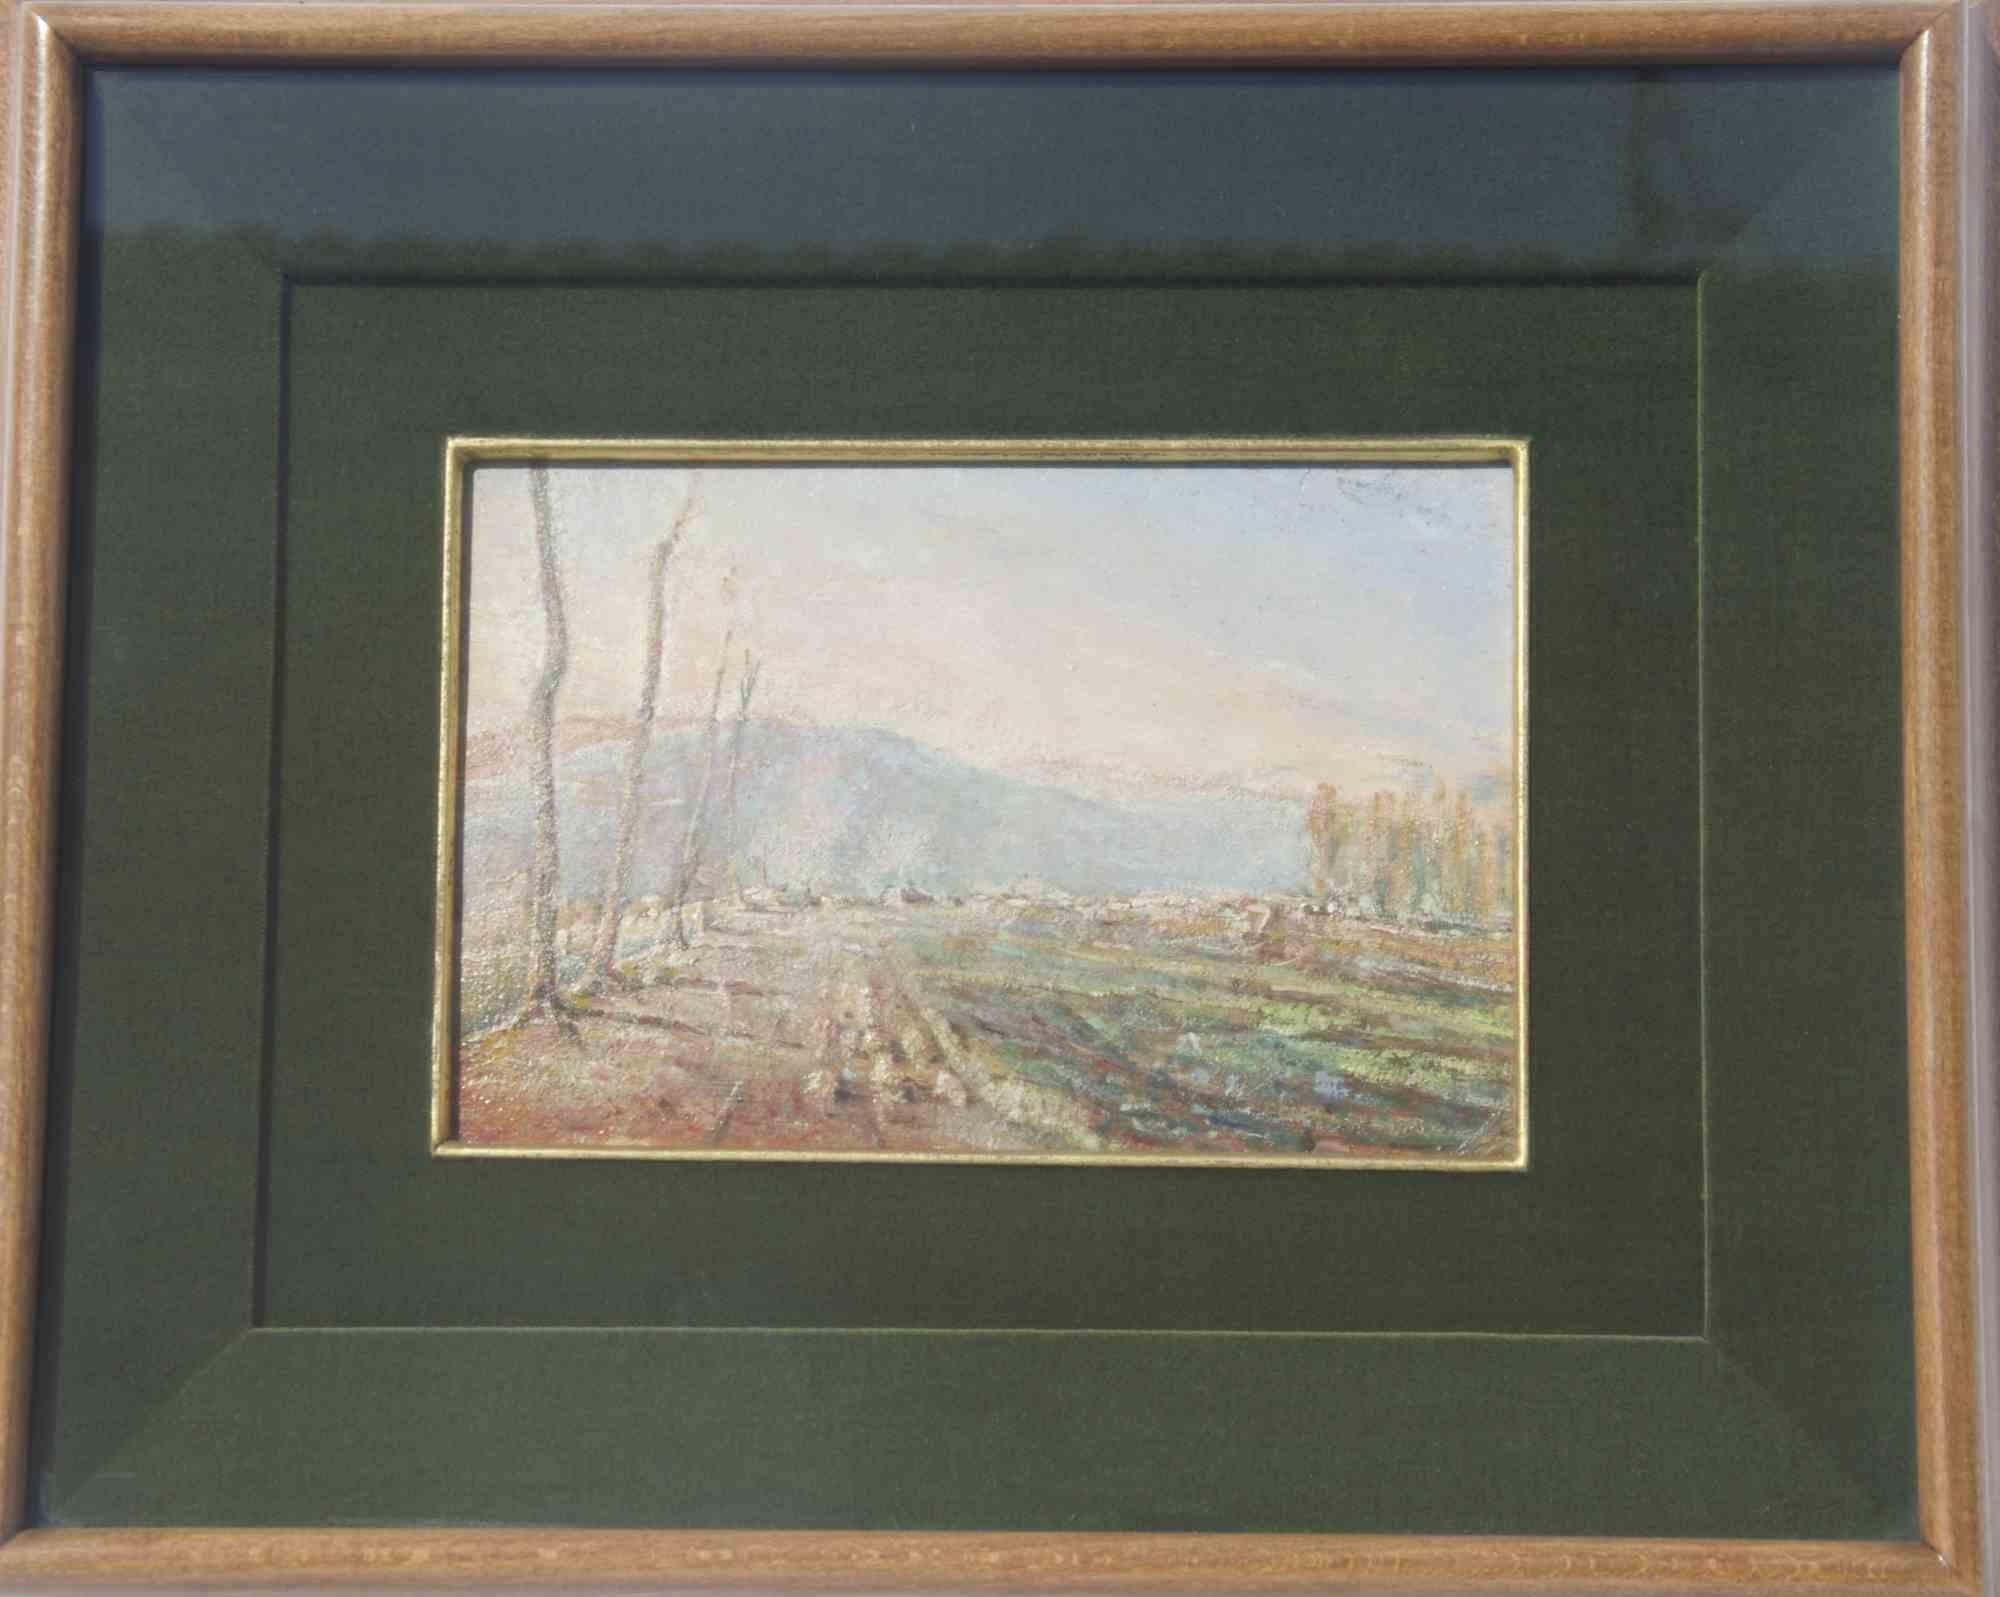 Unknown Figurative Painting - Landscape - Oil Paint by Amos Cassioli - 19th Century